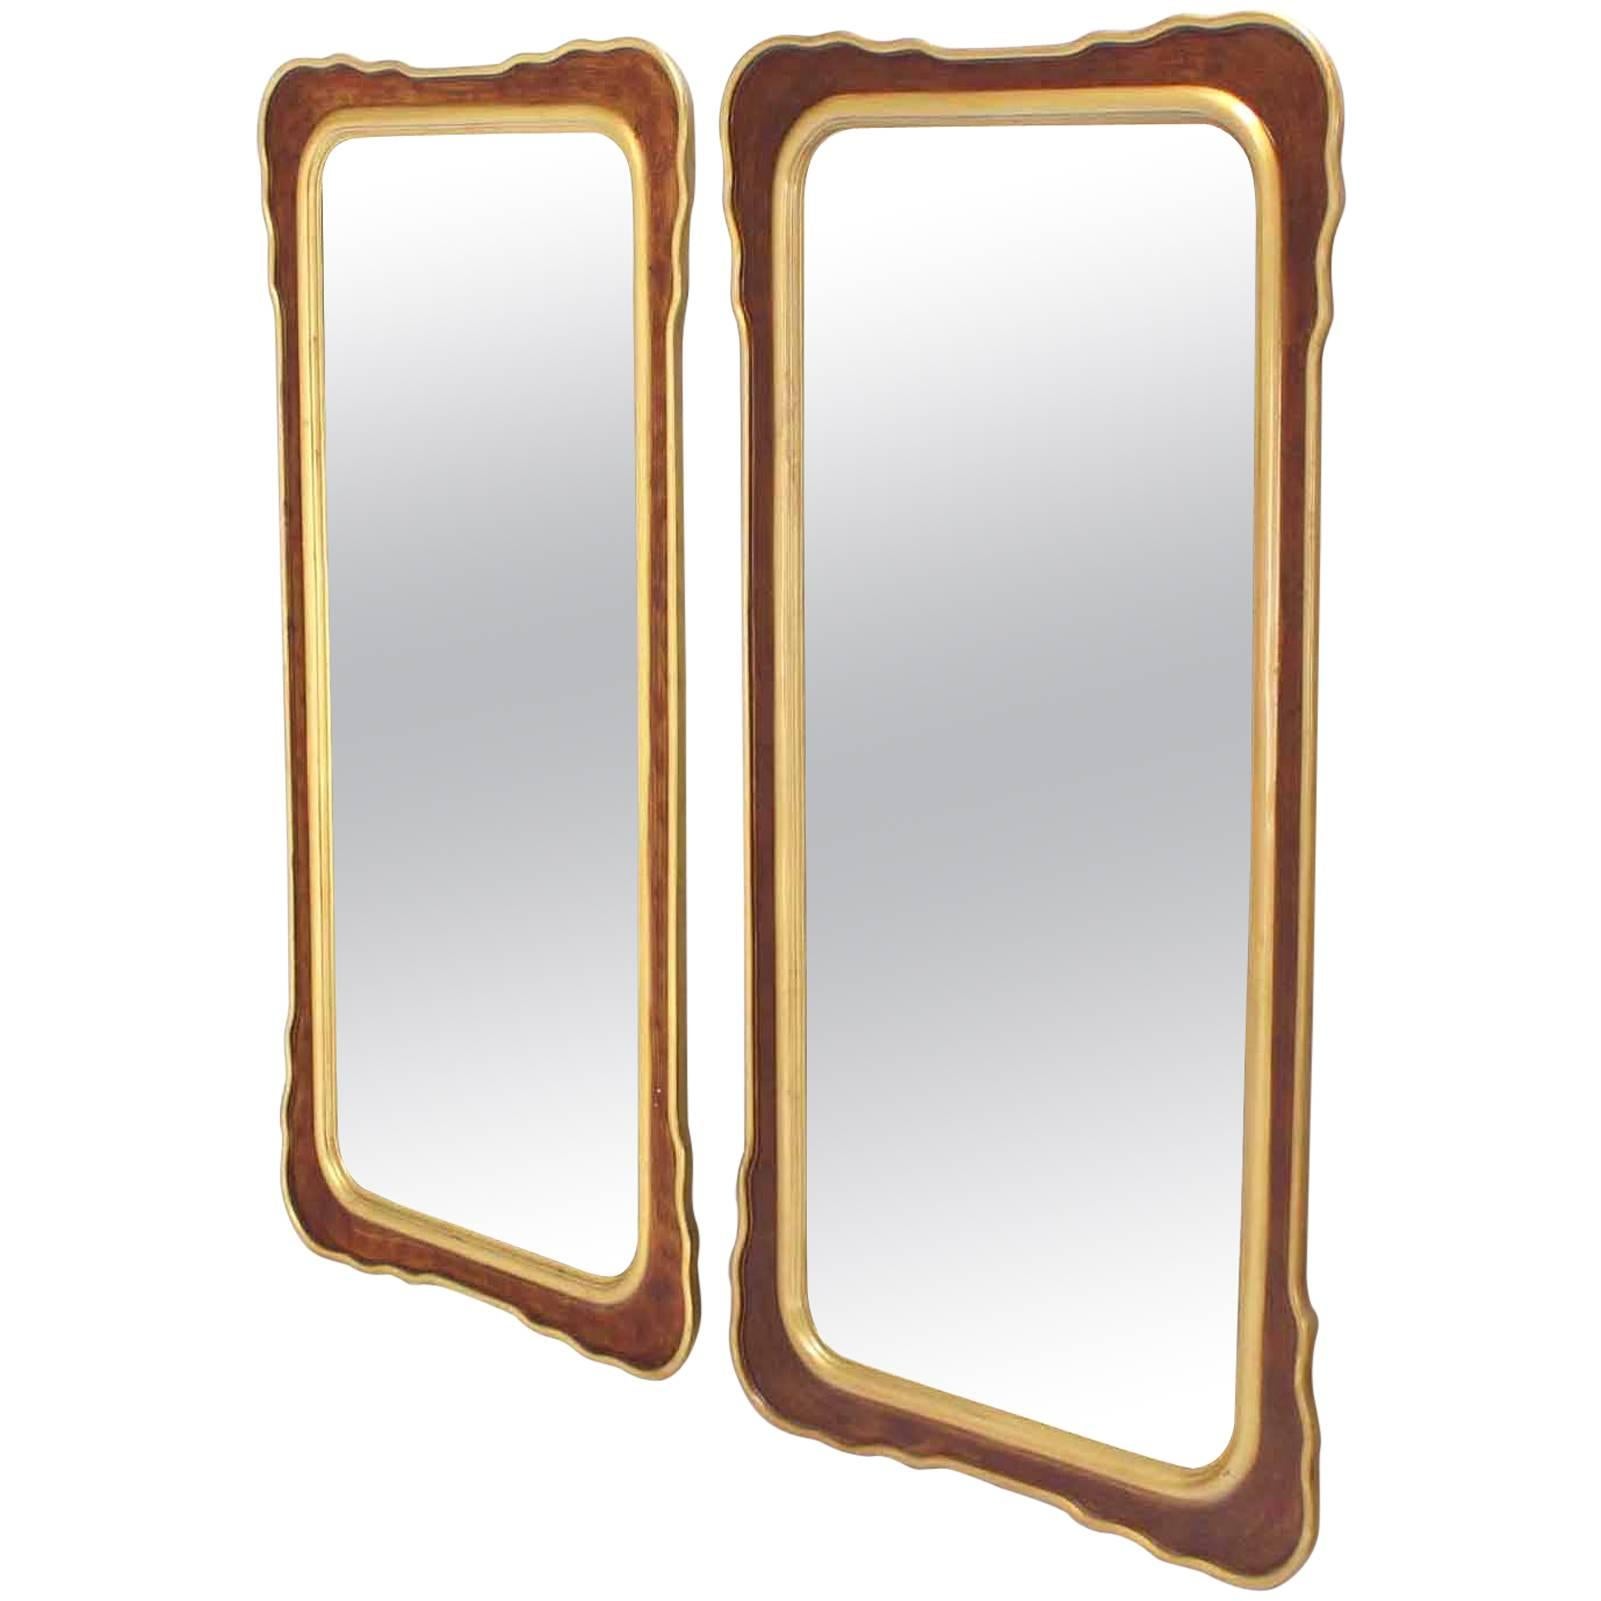 Pair of Burl Wood and Gold Frames Rectangular Mirrors